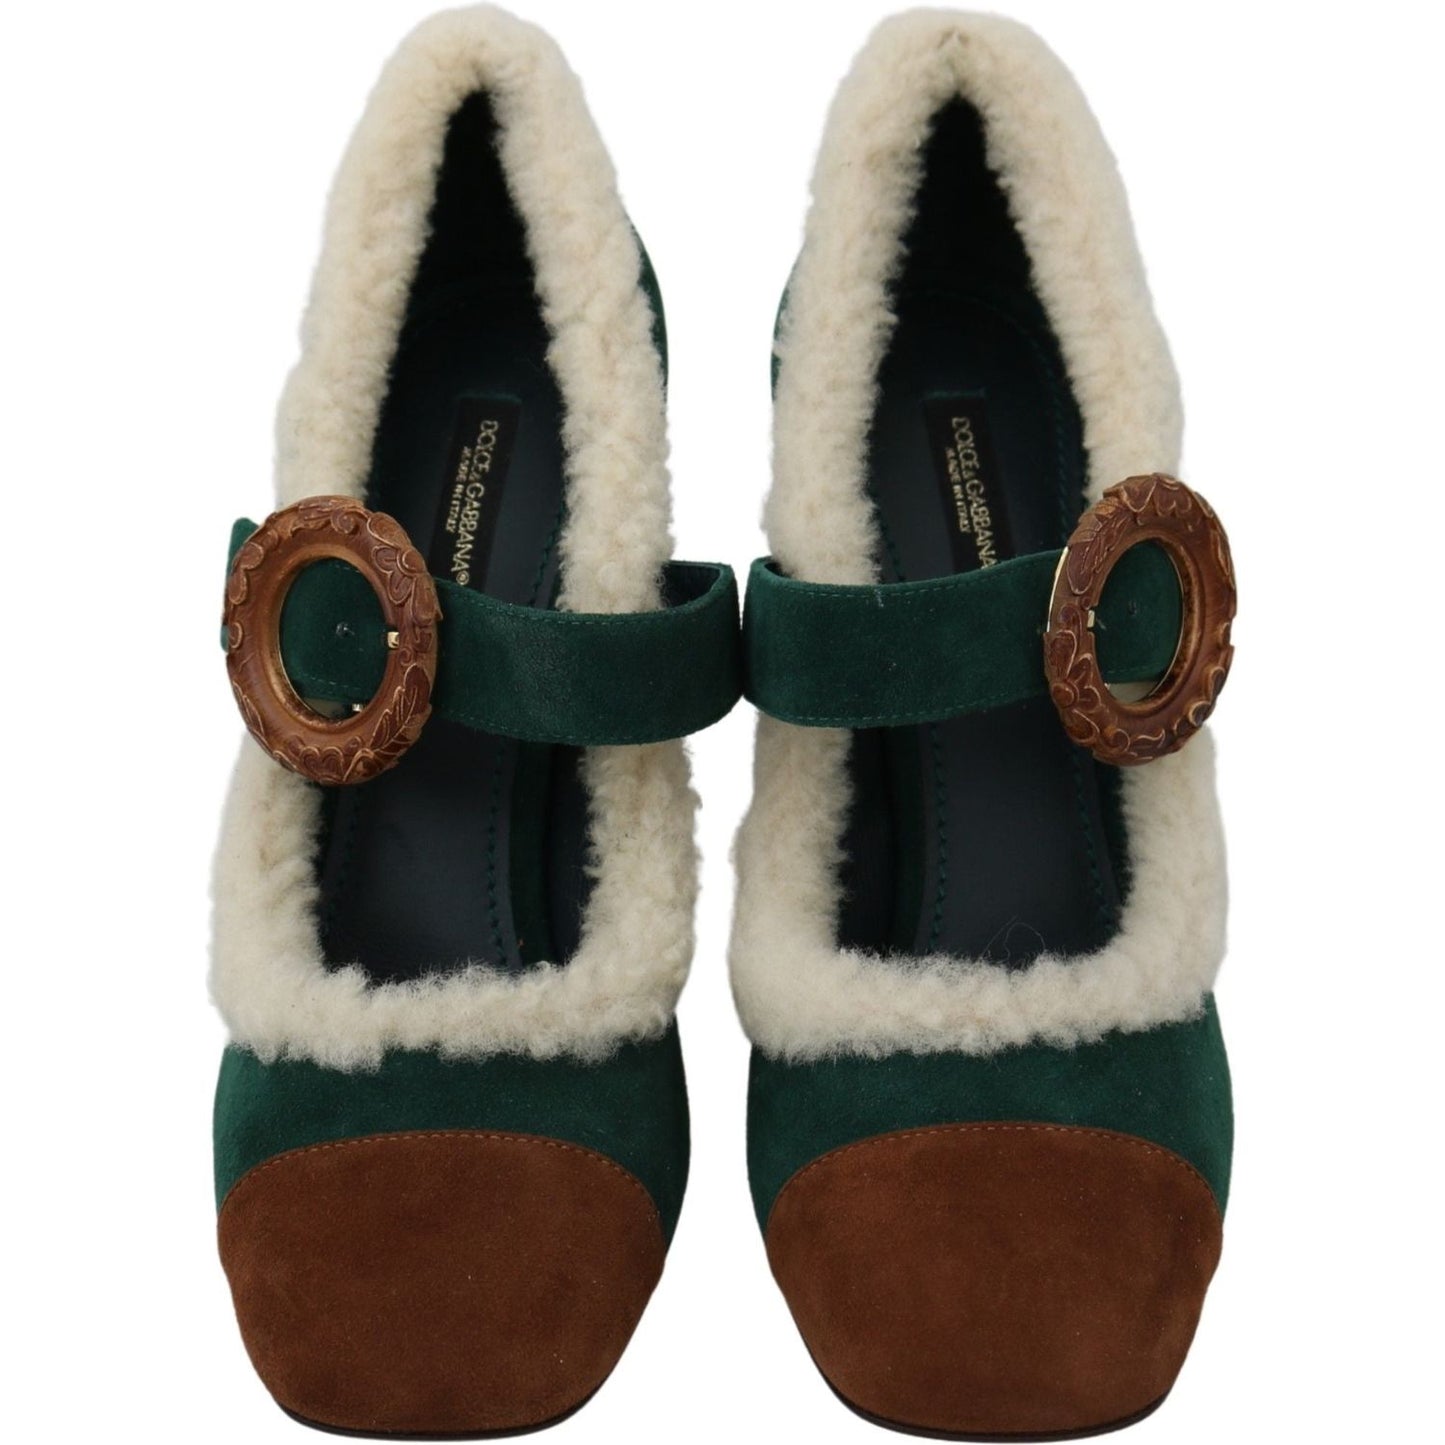 Dolce & Gabbana Chic Green Suede Mary Janes with Shearling Trim green-suede-fur-shearling-mary-jane-shoes IMG_0166-58847454-b2c.jpg